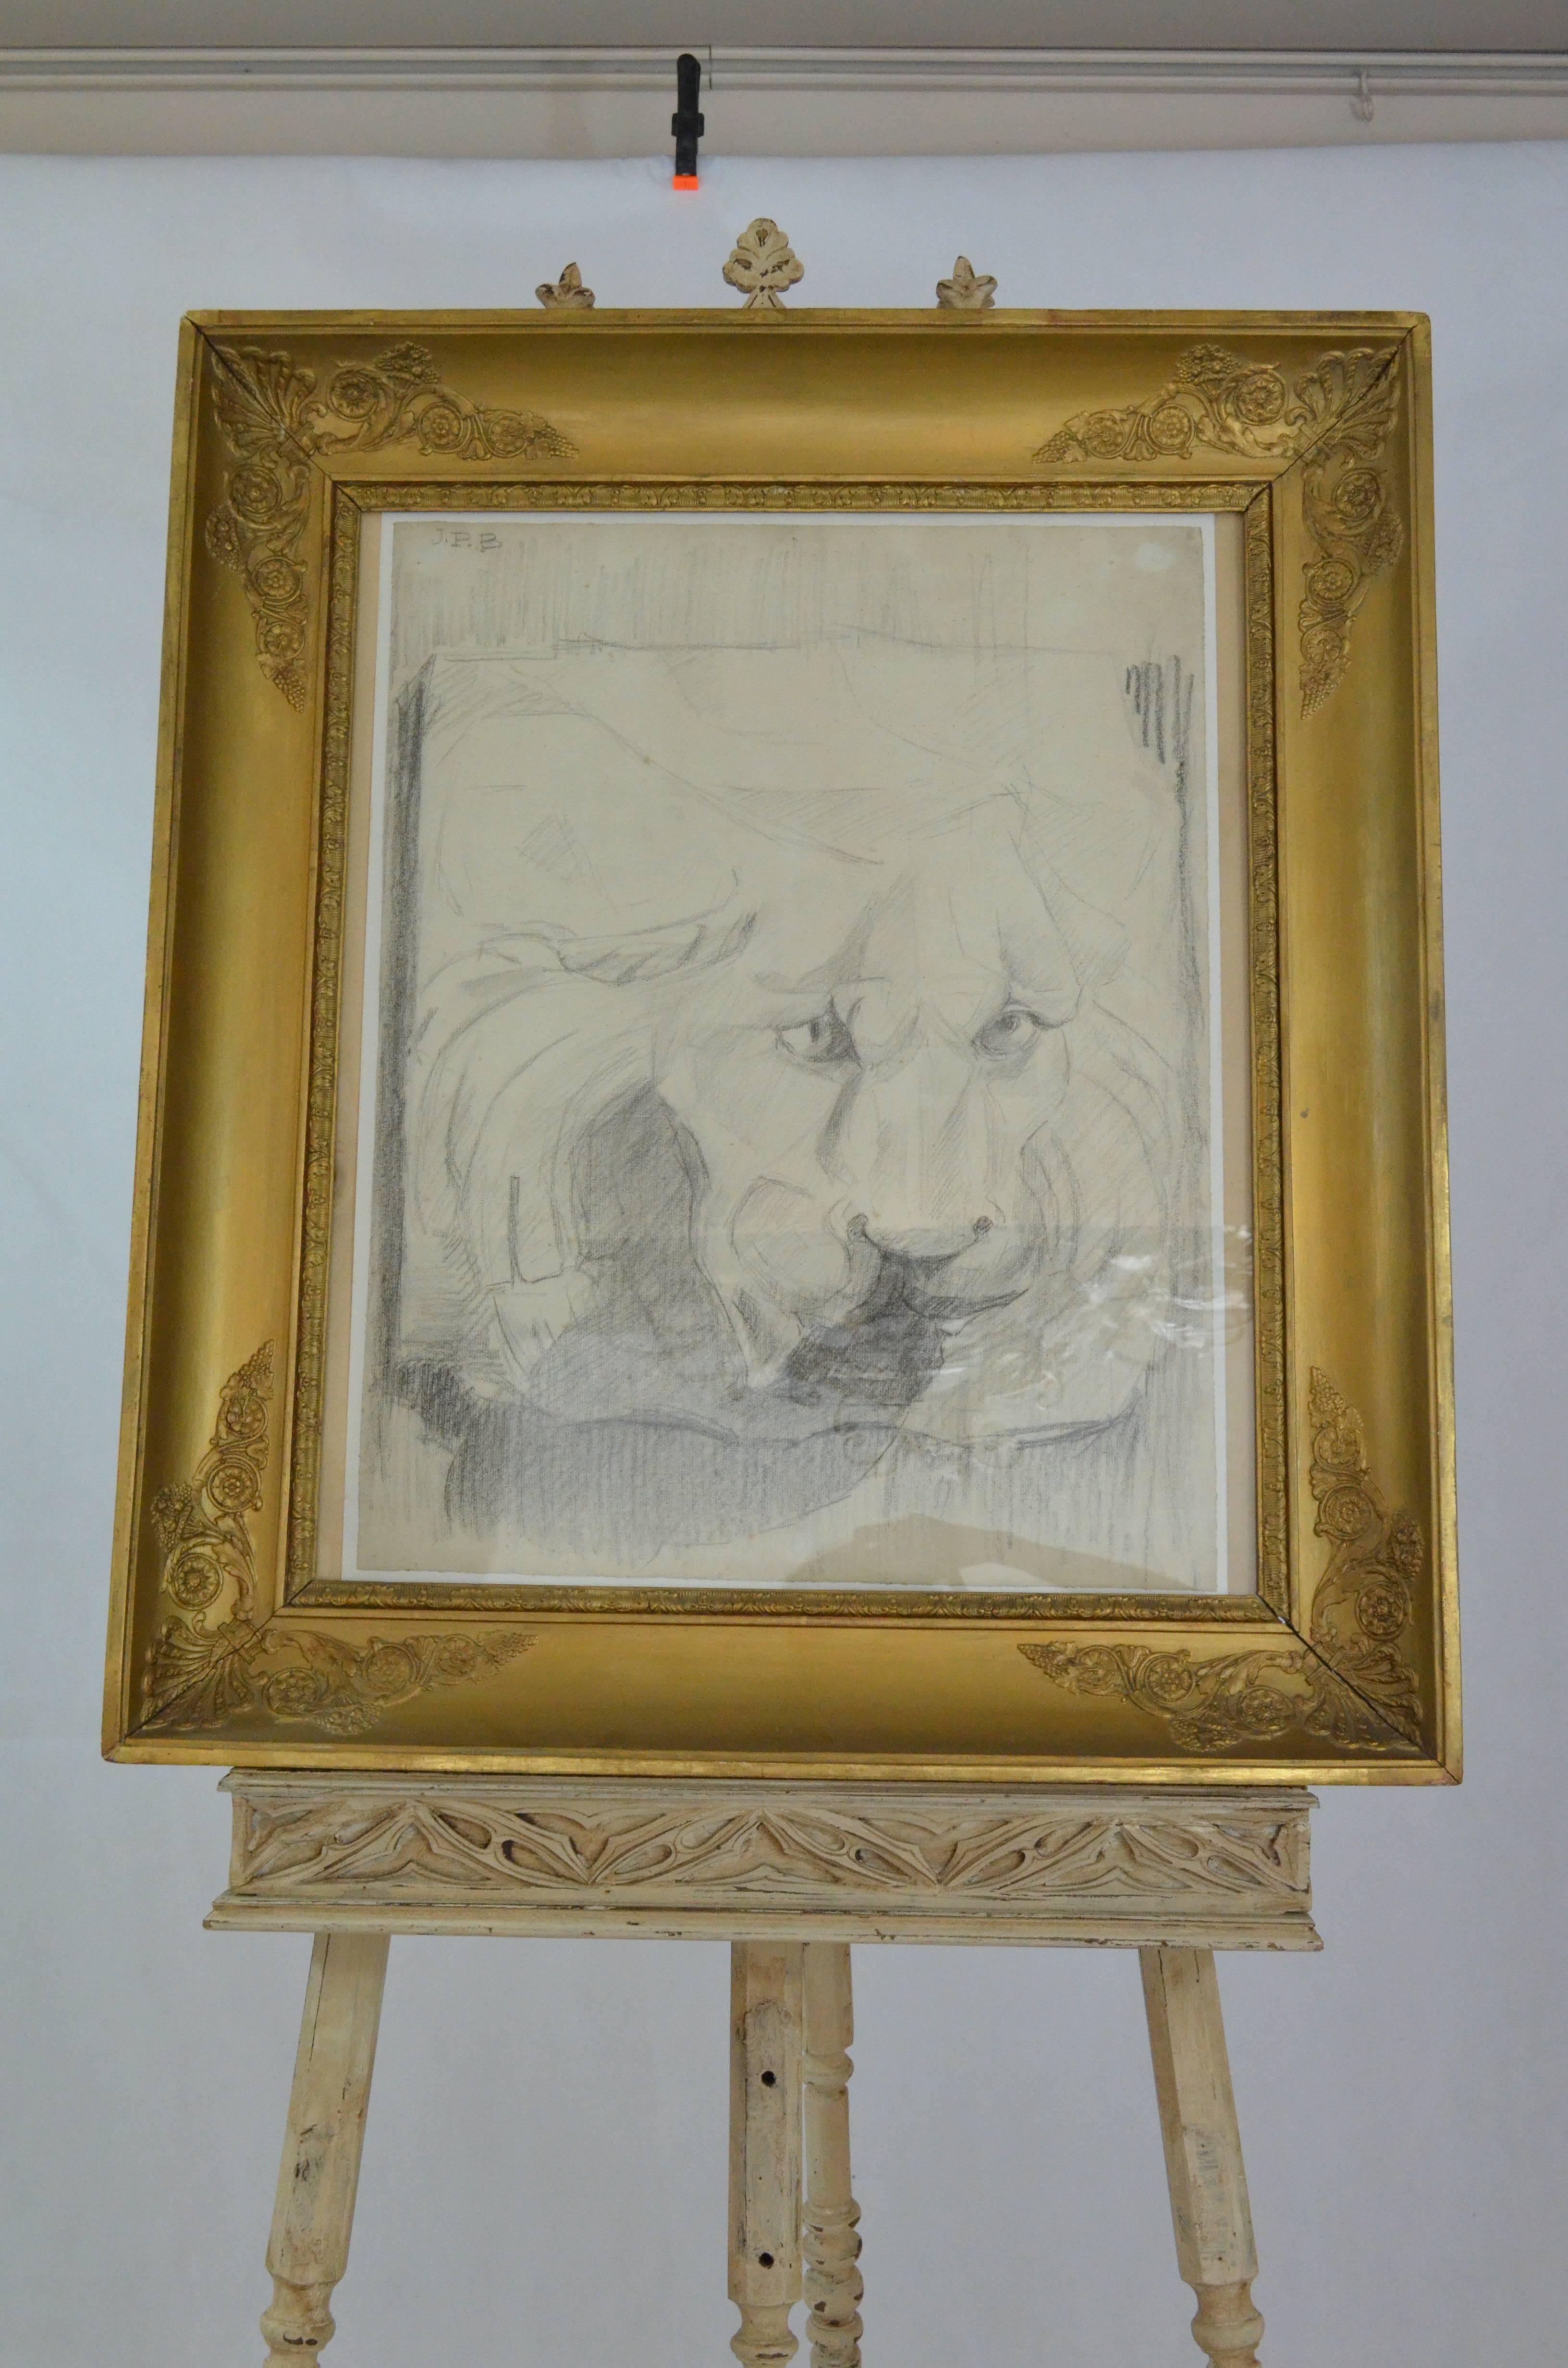 Here you have a charcoal particular drawing representing a lion framed by a precious Empire gold foil frame. The drawing is from the early 20th century, the frame is from early 19th century, featuring the original gold foil and the typical